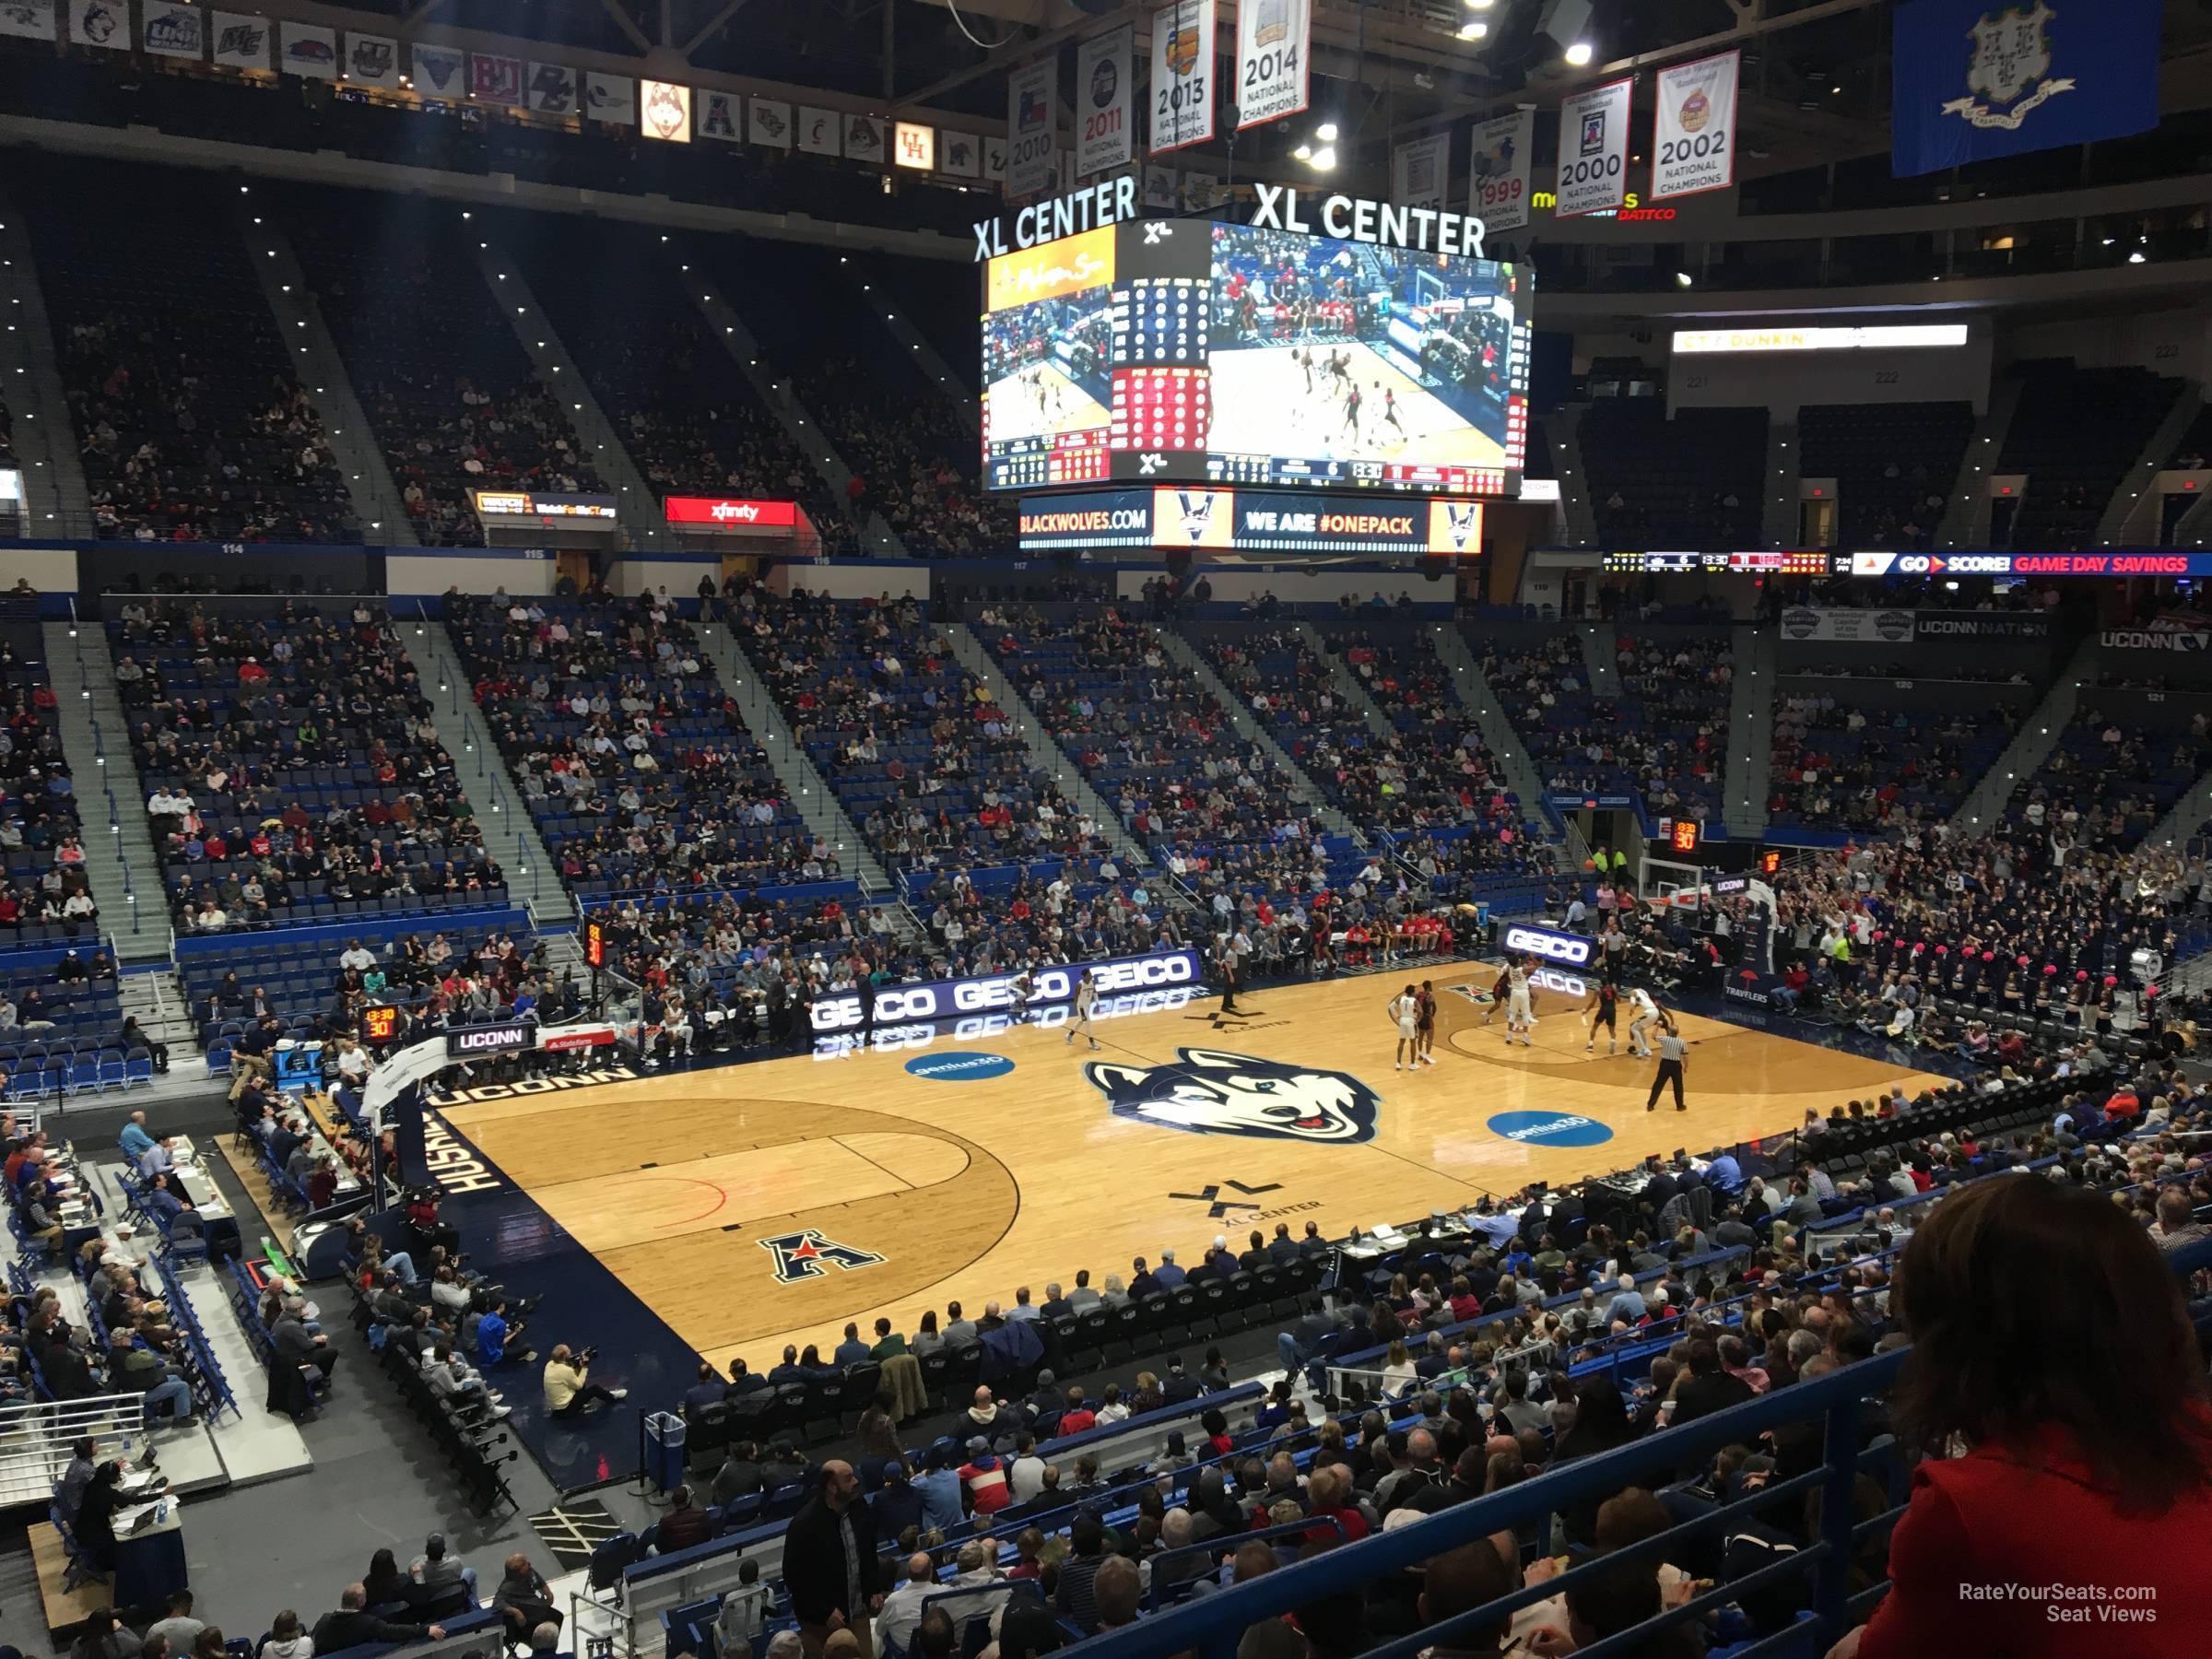 section 106, row r seat view  - xl center